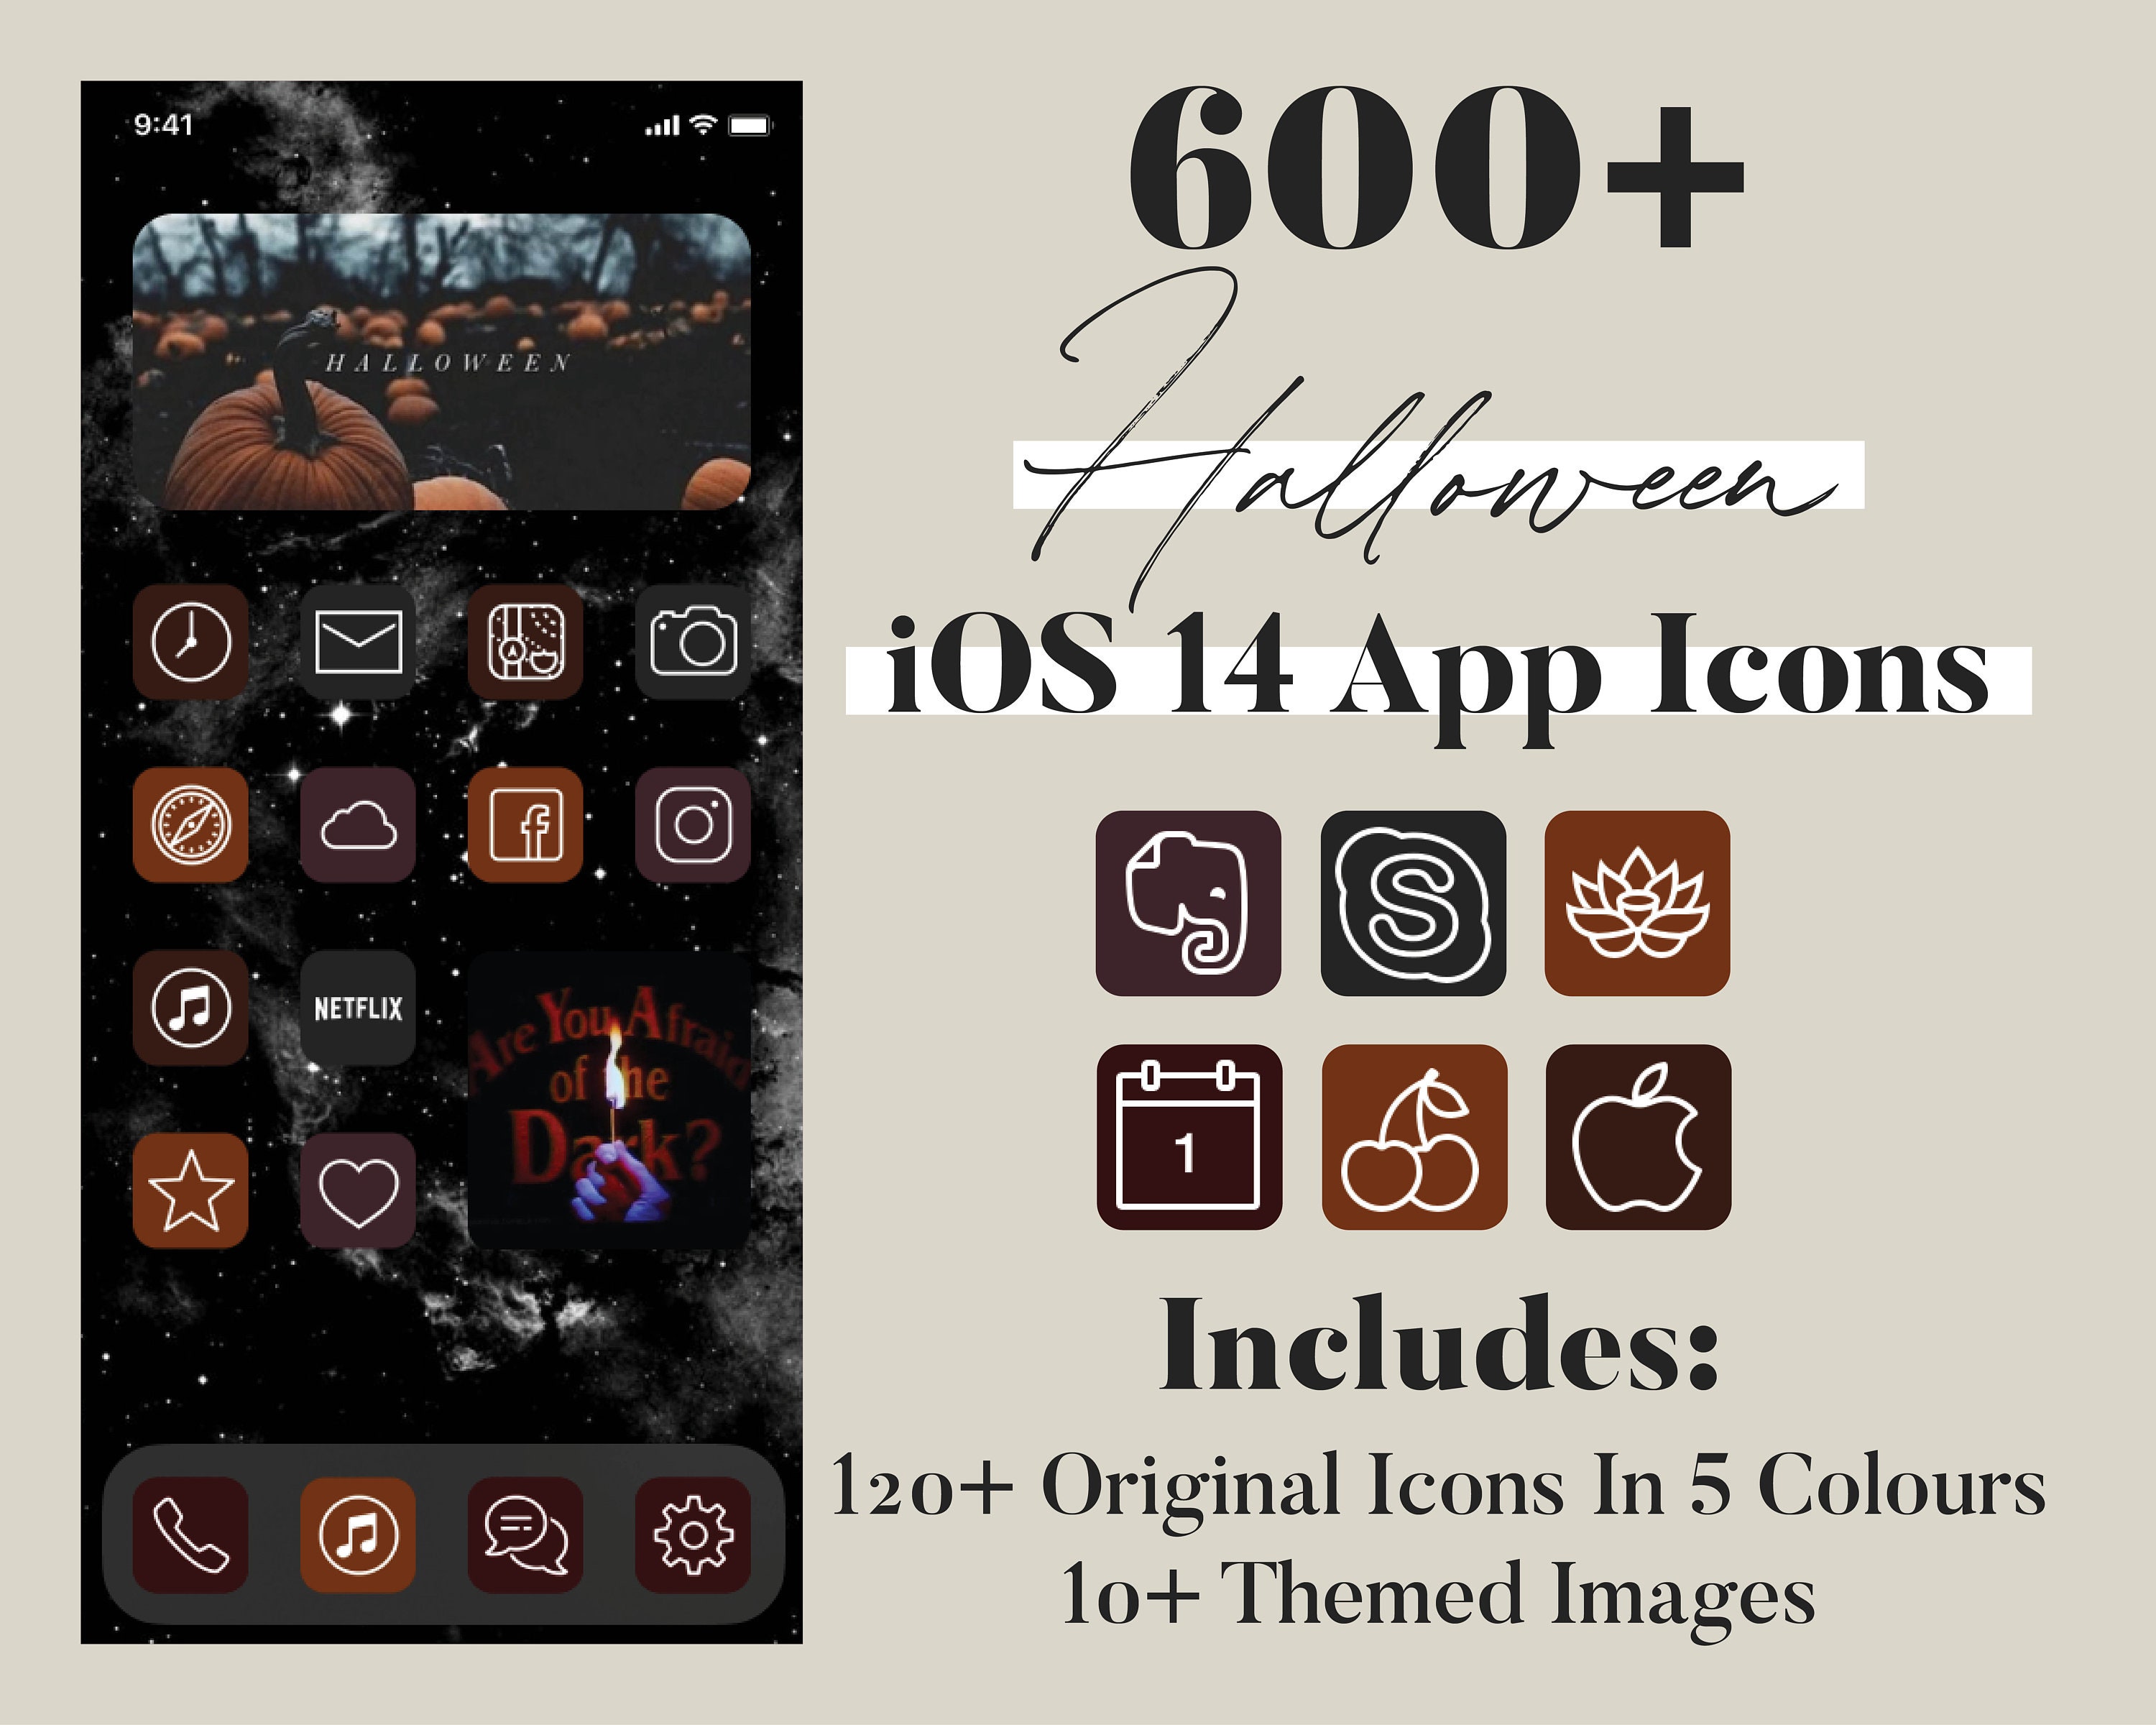 Free Supreme App Icons - Aesthetic App Icons for iOS 14 & Android